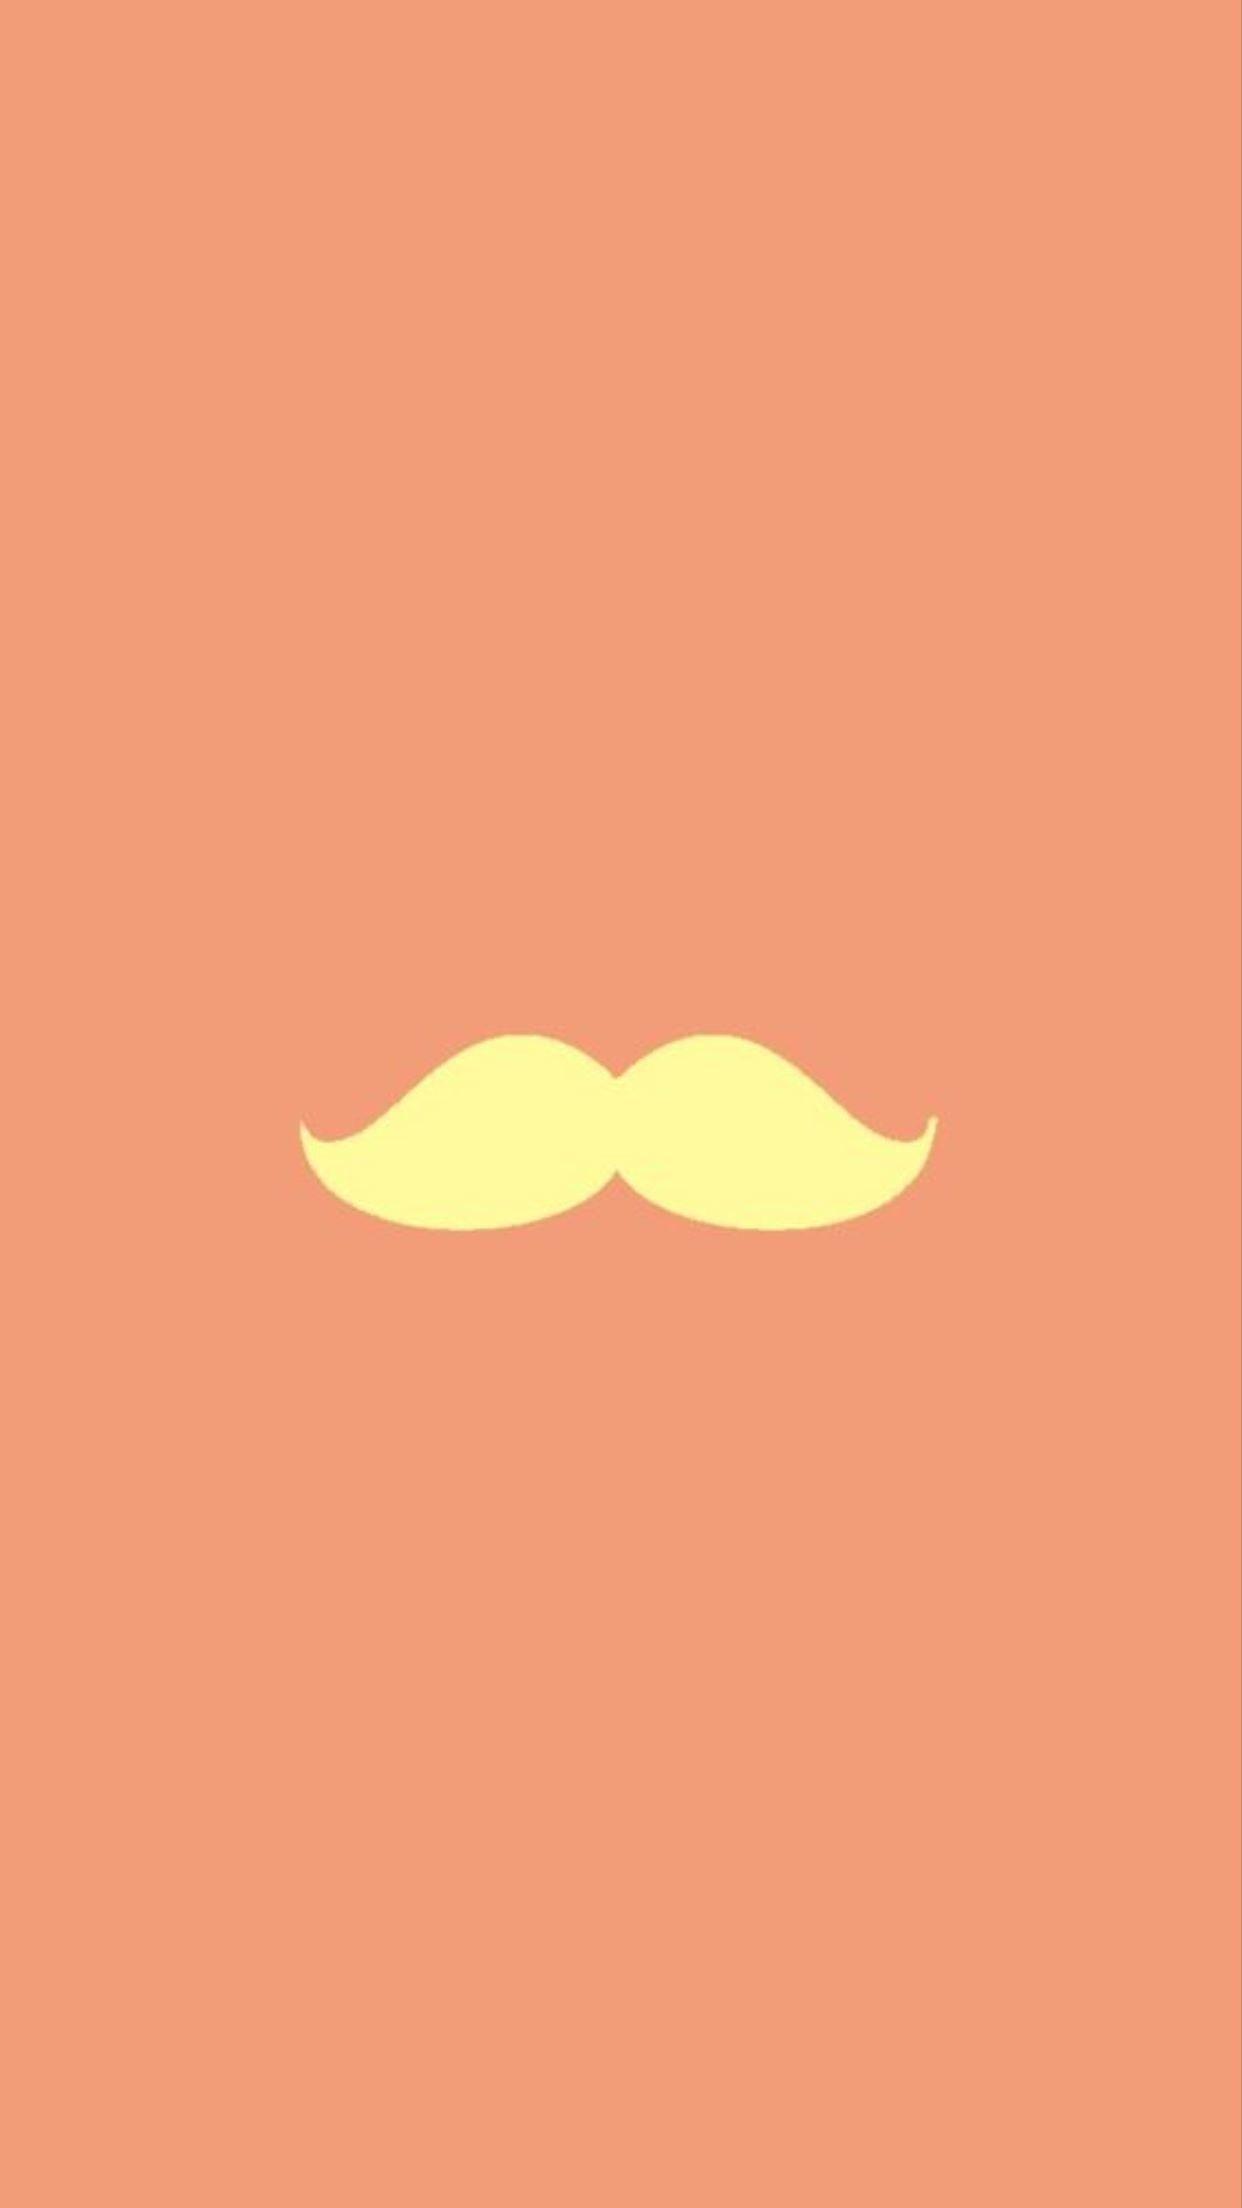 Mustache iPhone Wallpapers - Top Free Mustache iPhone Backgrounds ...